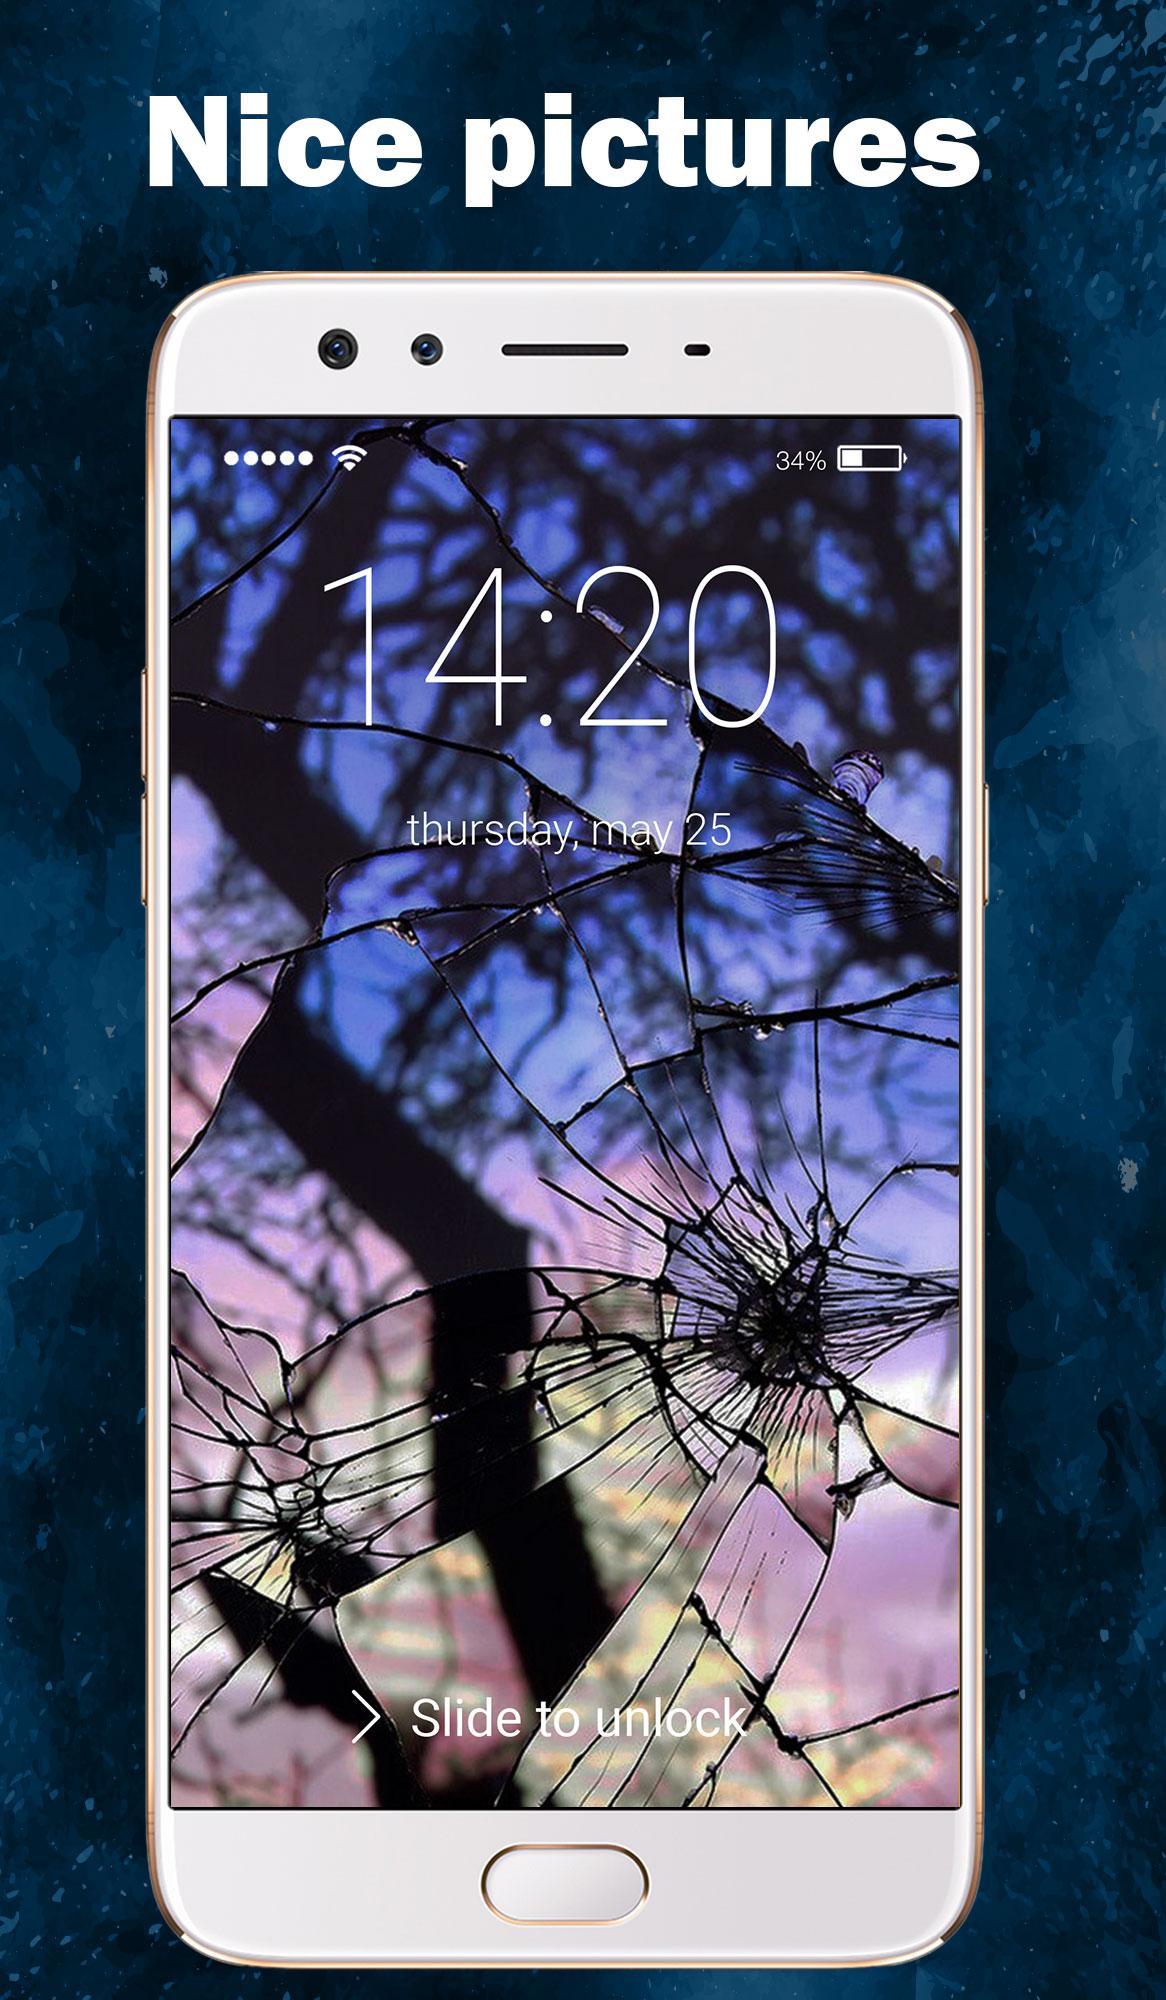 Broken Screen Mirror Wallpapers Lock Screen For Android Apk Download Images, Photos, Reviews